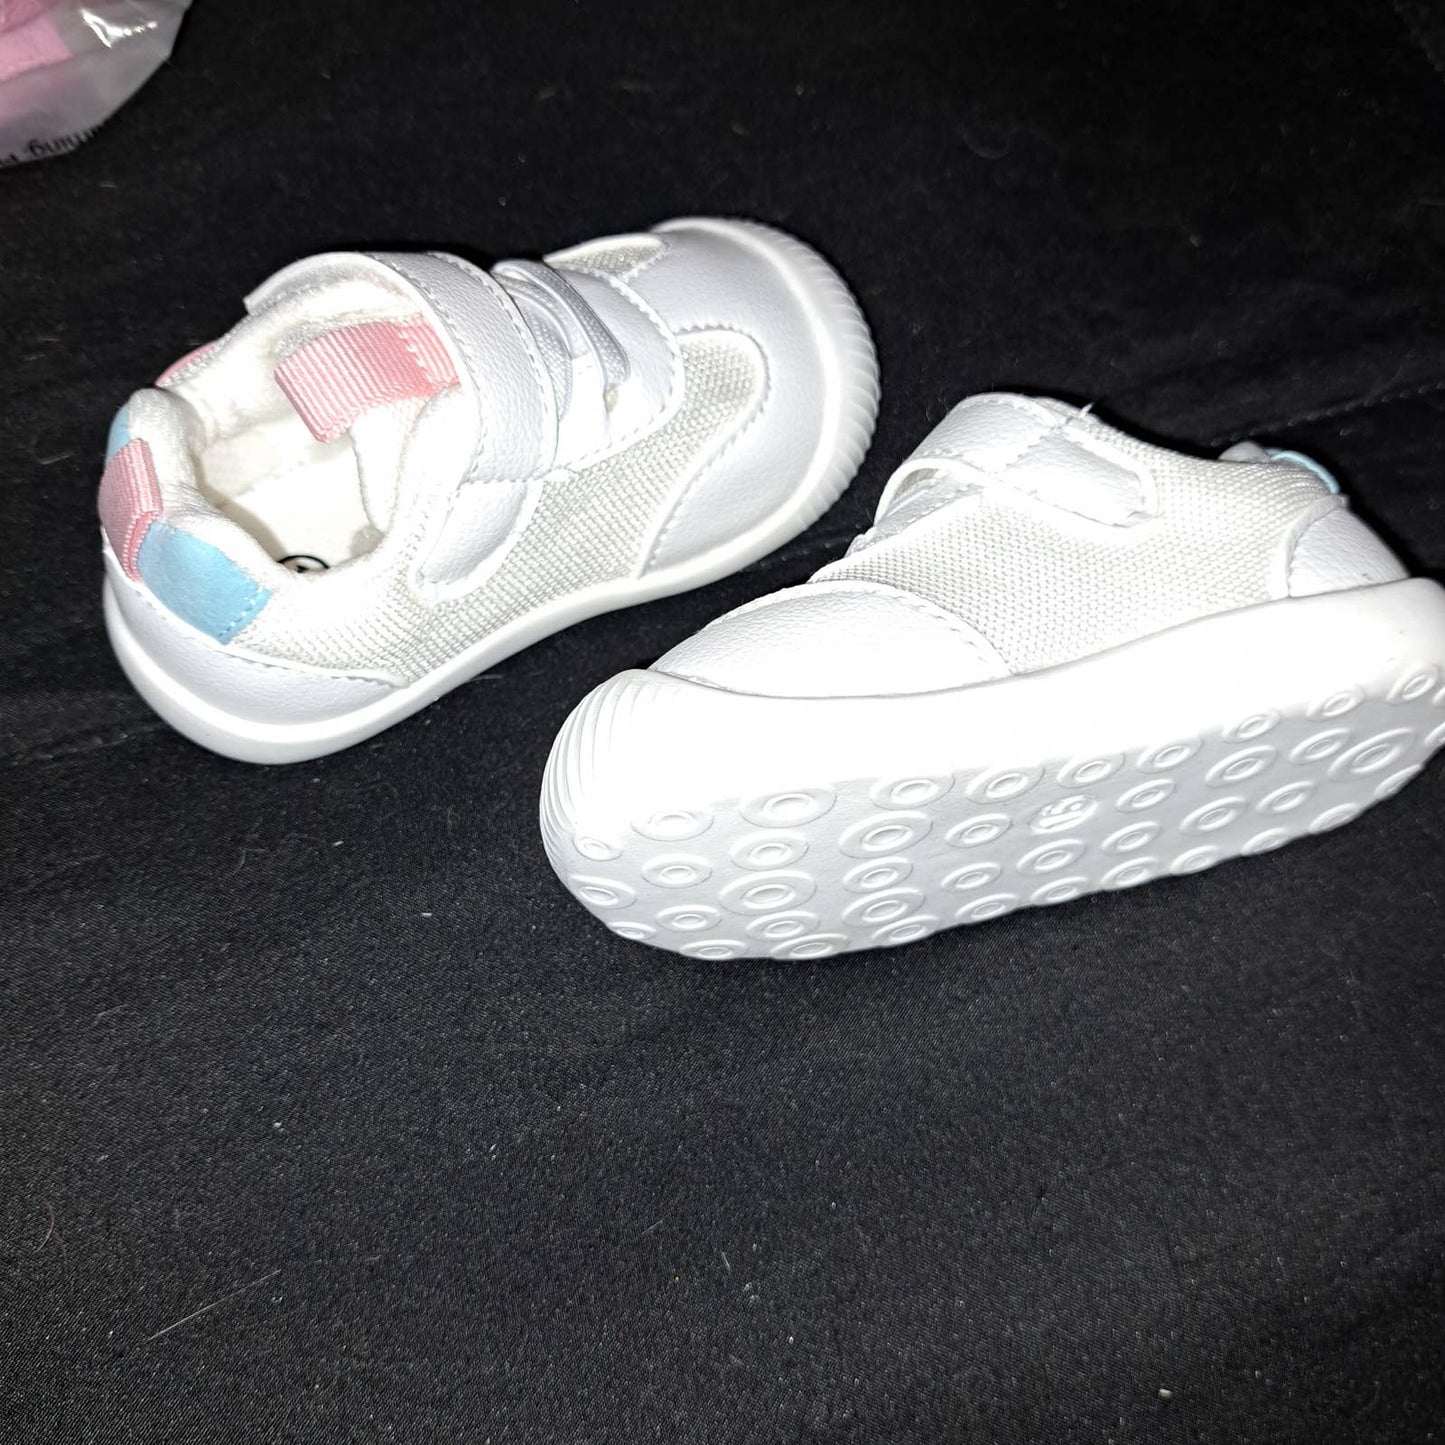 MK MATT KEELY Baby Shoes First Walking Shoes Girls Boys Breathable 15 UK